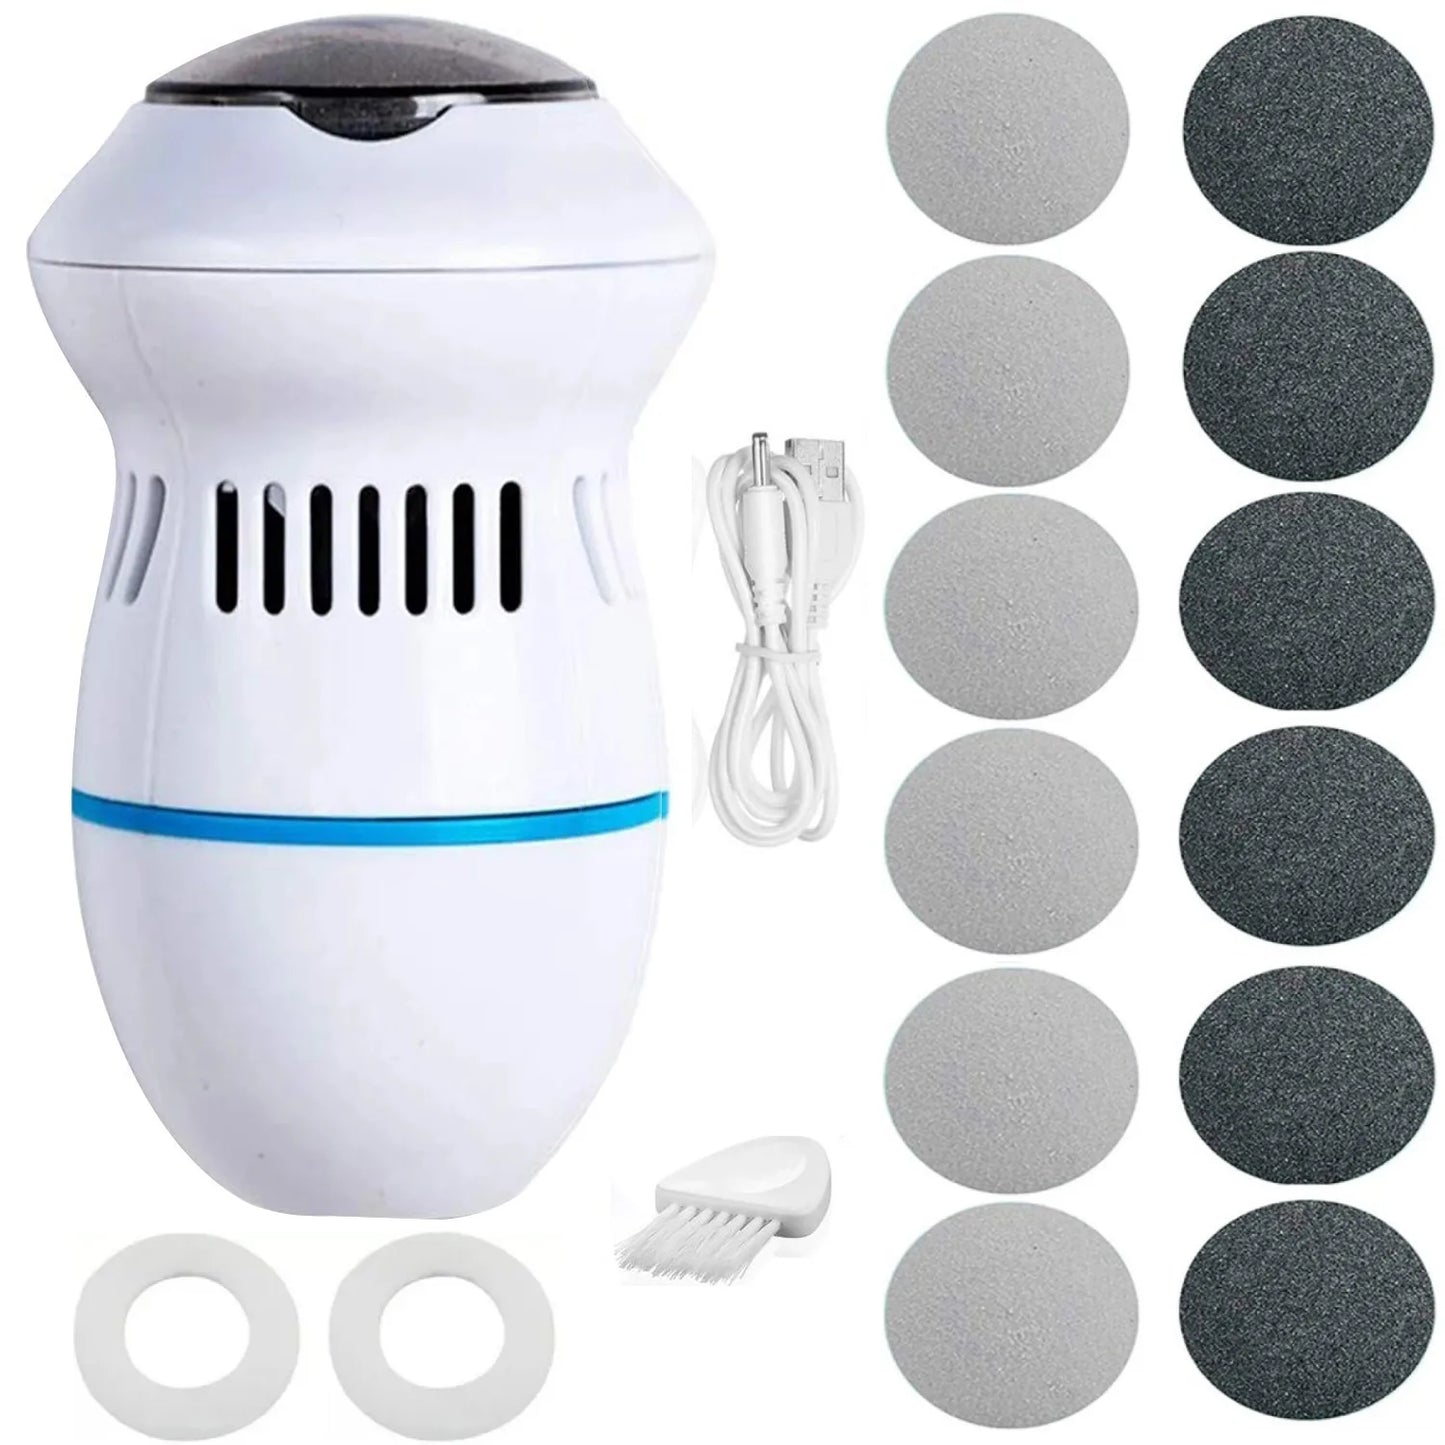 Best Electric Foot Callus Remover